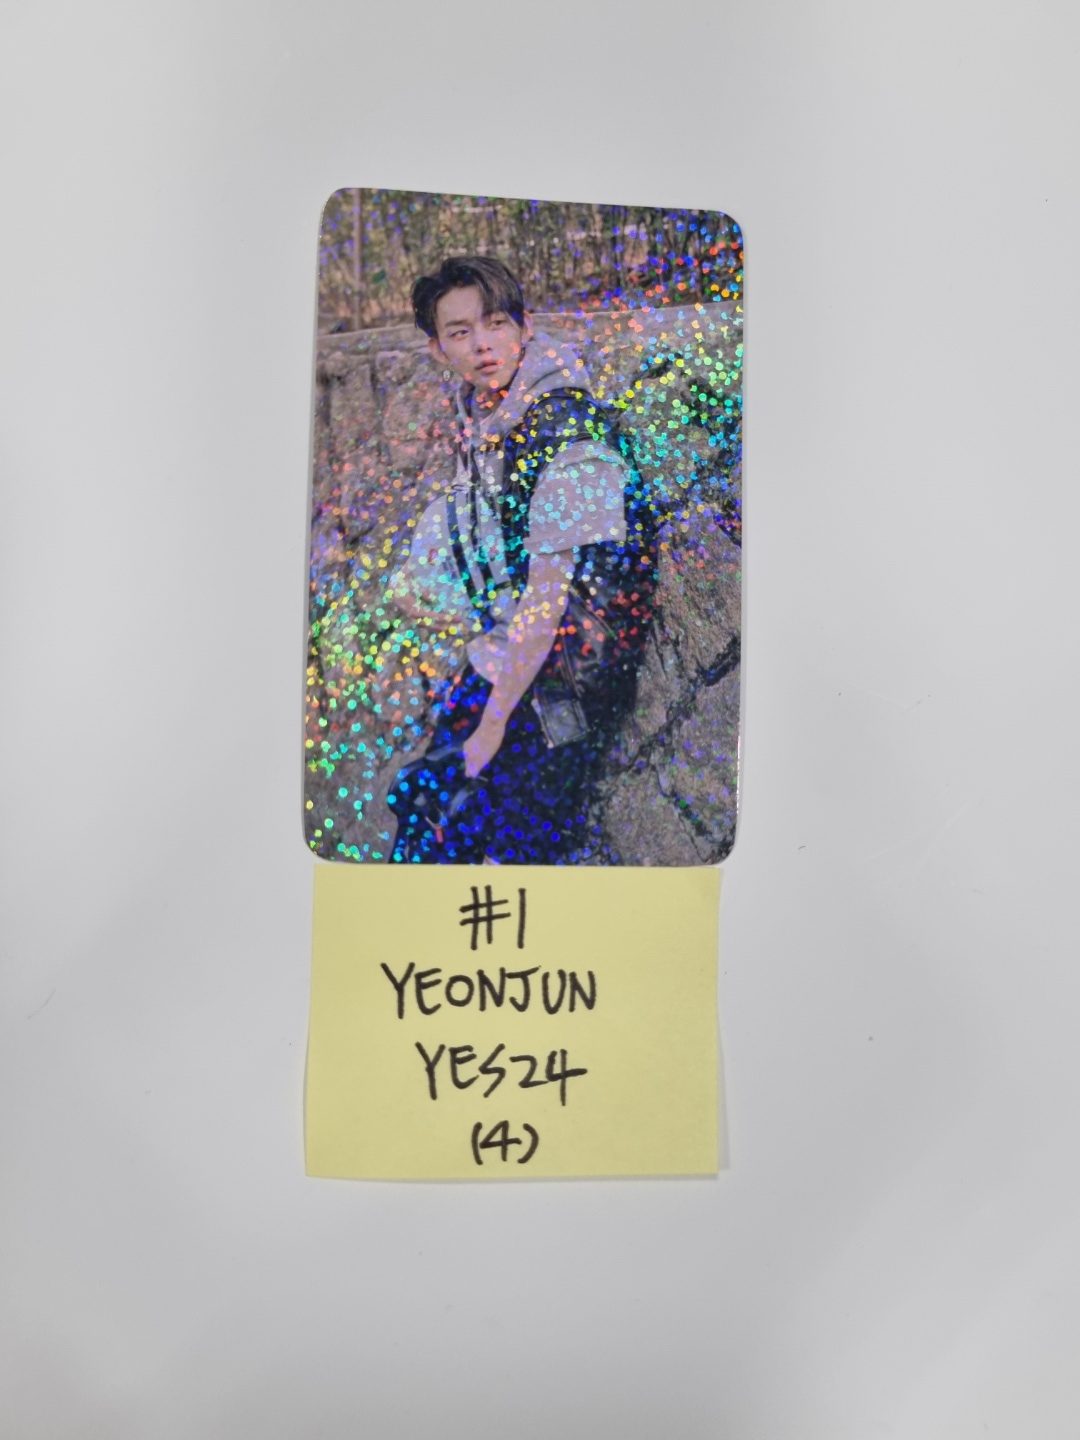 TXT 'Chaos Chapter: Freeze' - Yes24 Pre-order Benefit Hologram Photocard (updated 6.02)